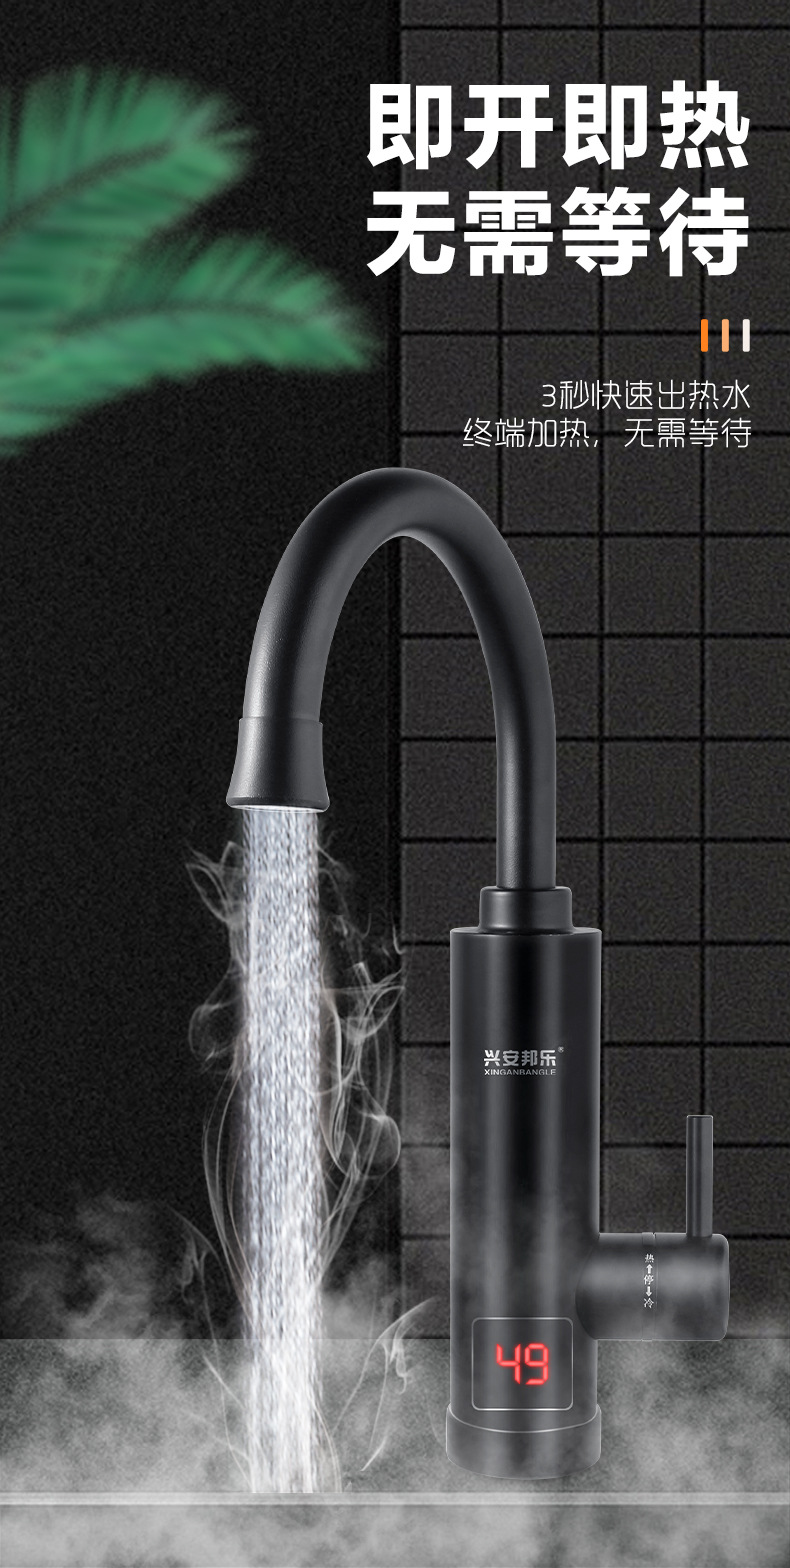 Instant Water Heater Cold And Hot Dual-purpose Electric Heating Faucet Installation-free Fast Hot Water Faucet Heater Wholesale